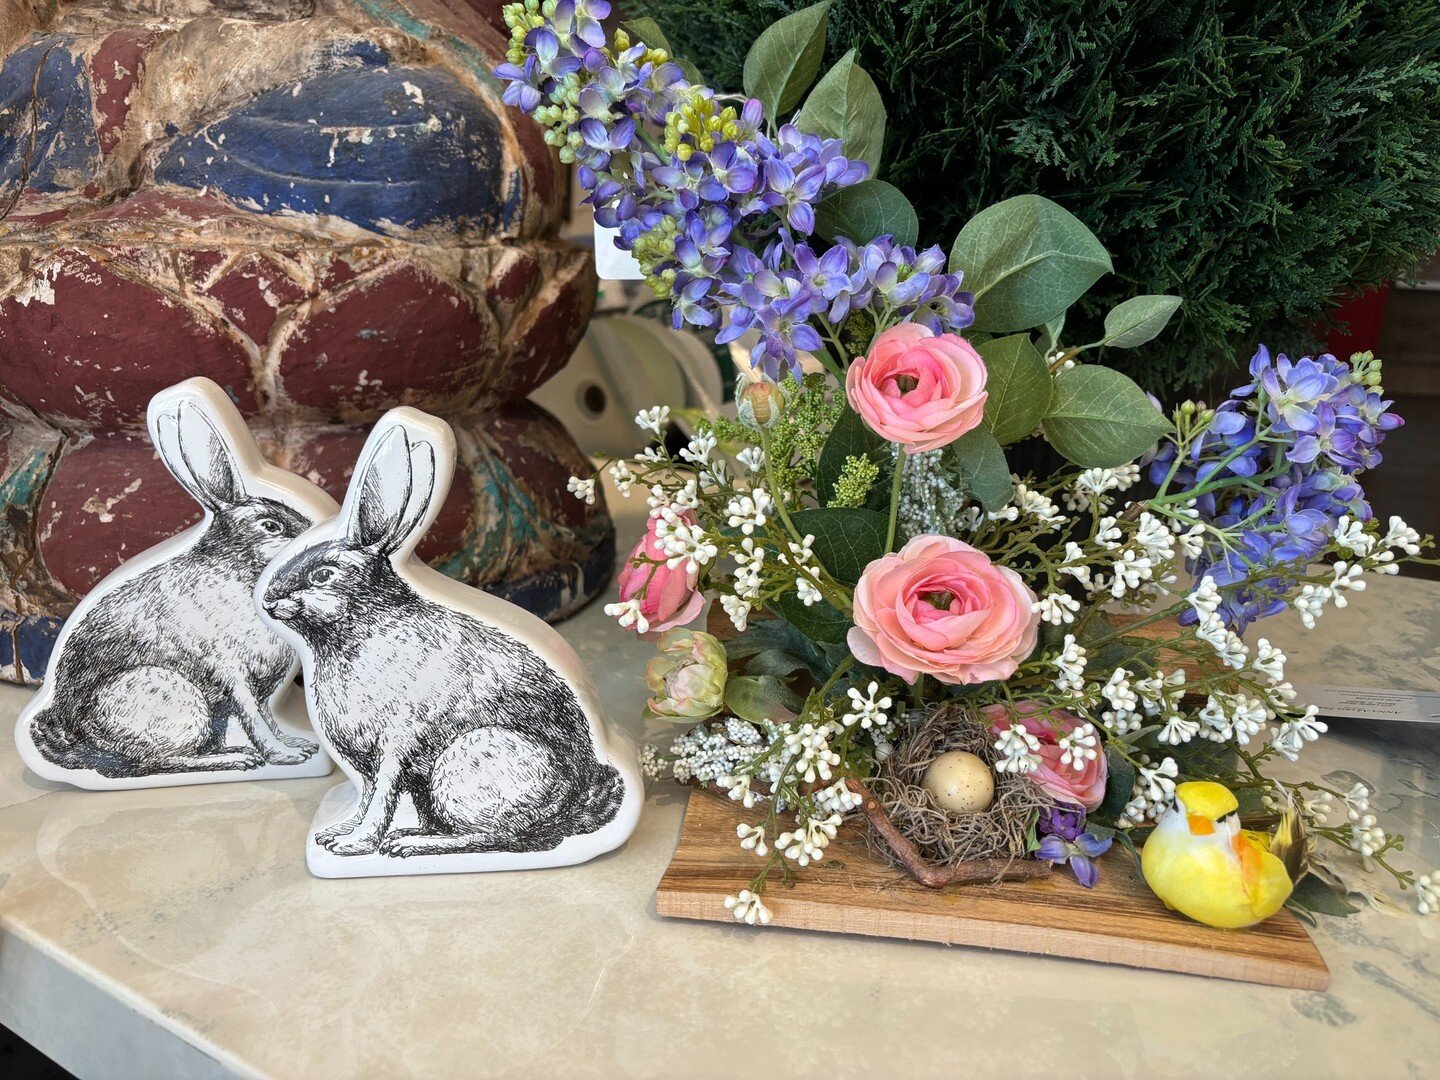 In preparation for Easter, Studio Ferro will be closing at 2:00 Friday and reopening Wednesday, April 4th. #studioferro #interiordesign #floraldesign #visitmorris